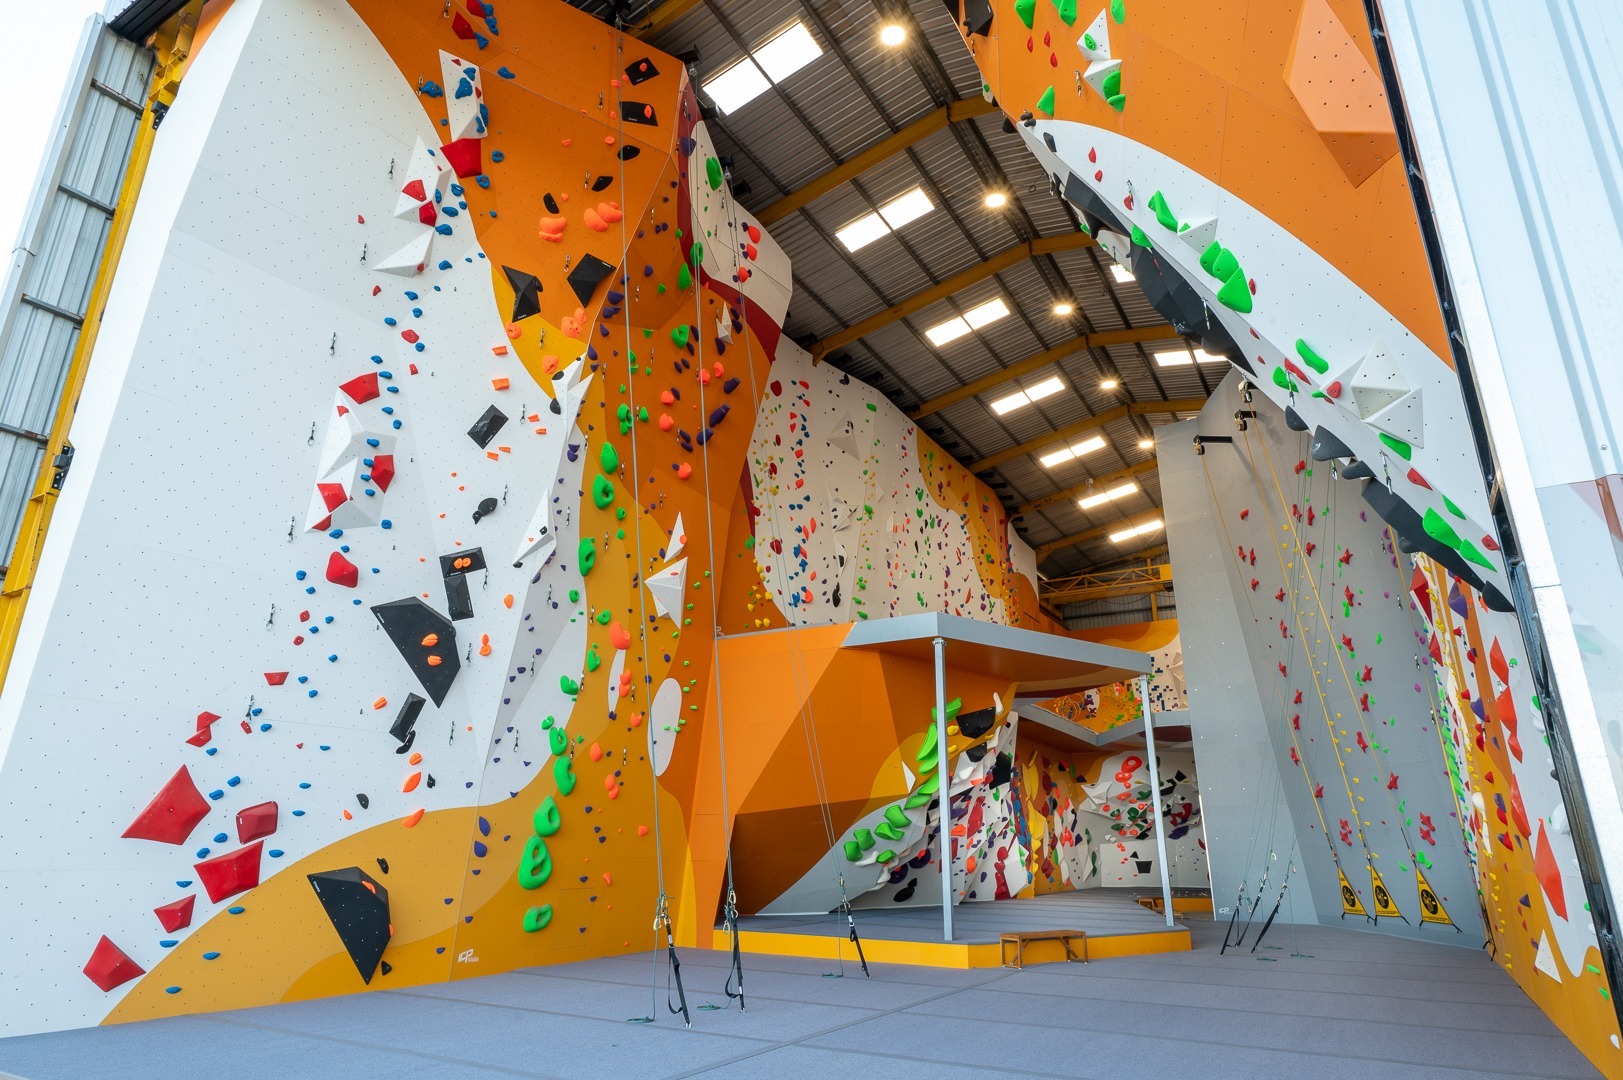 A bouldering gym with white, red and black paint work built by international climbing wall builder, ICP. The walls are filled with various colourful holds and volumes.